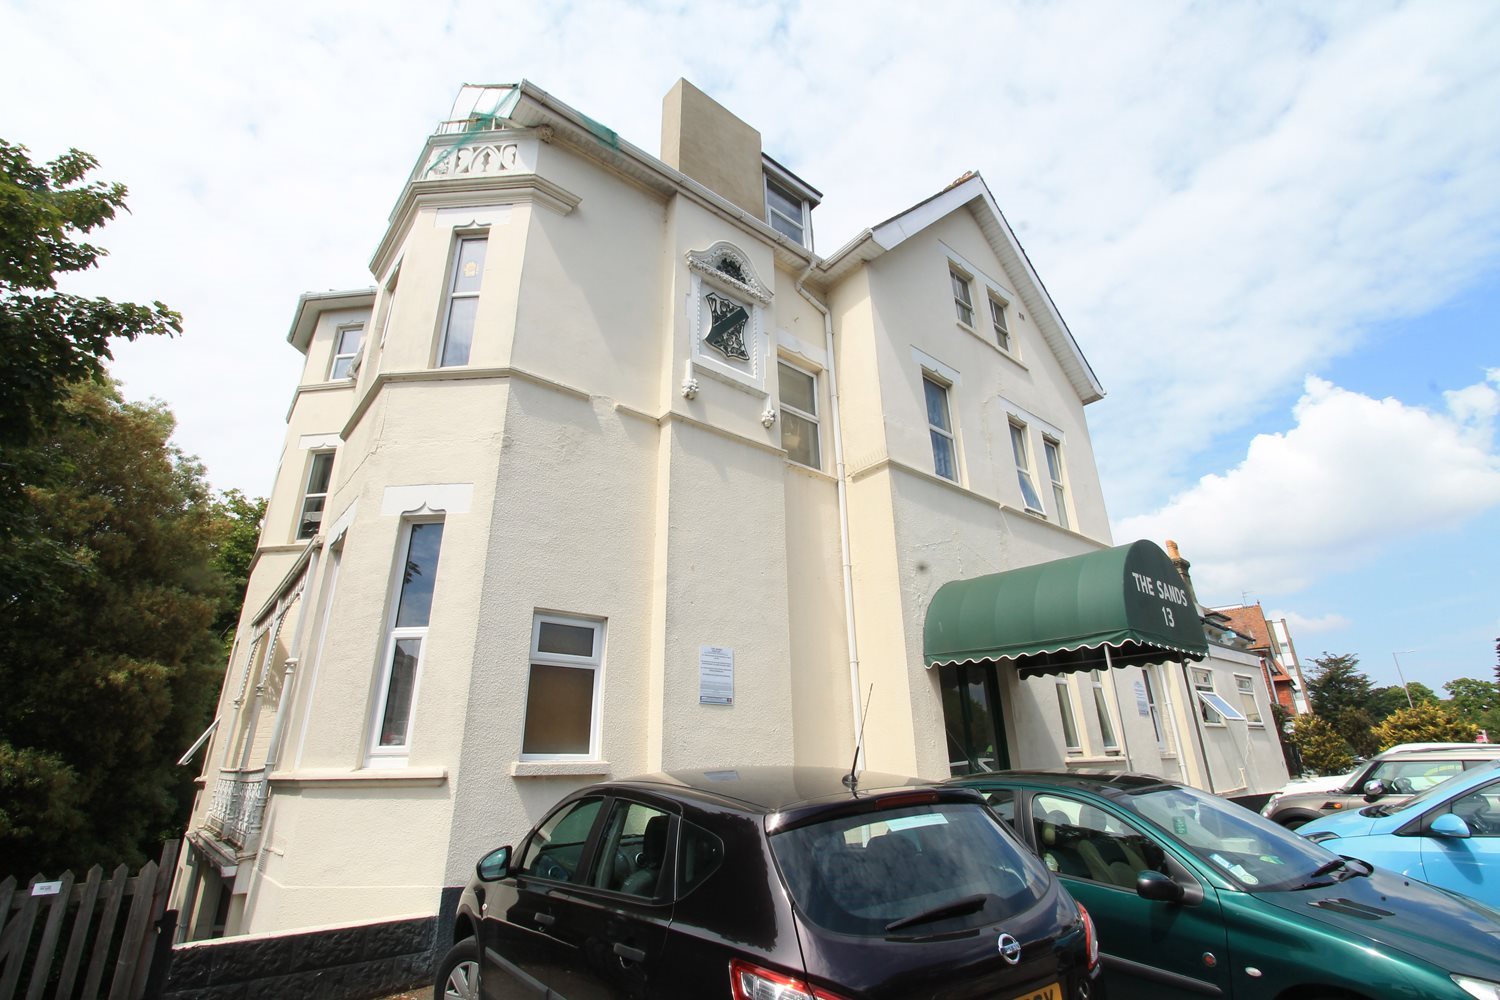 Christopher Shaw are pleased to present this studio apartment with parking close to Boscombe Chine Gardens and the beach, for sale with tenant in situ for immediate income.